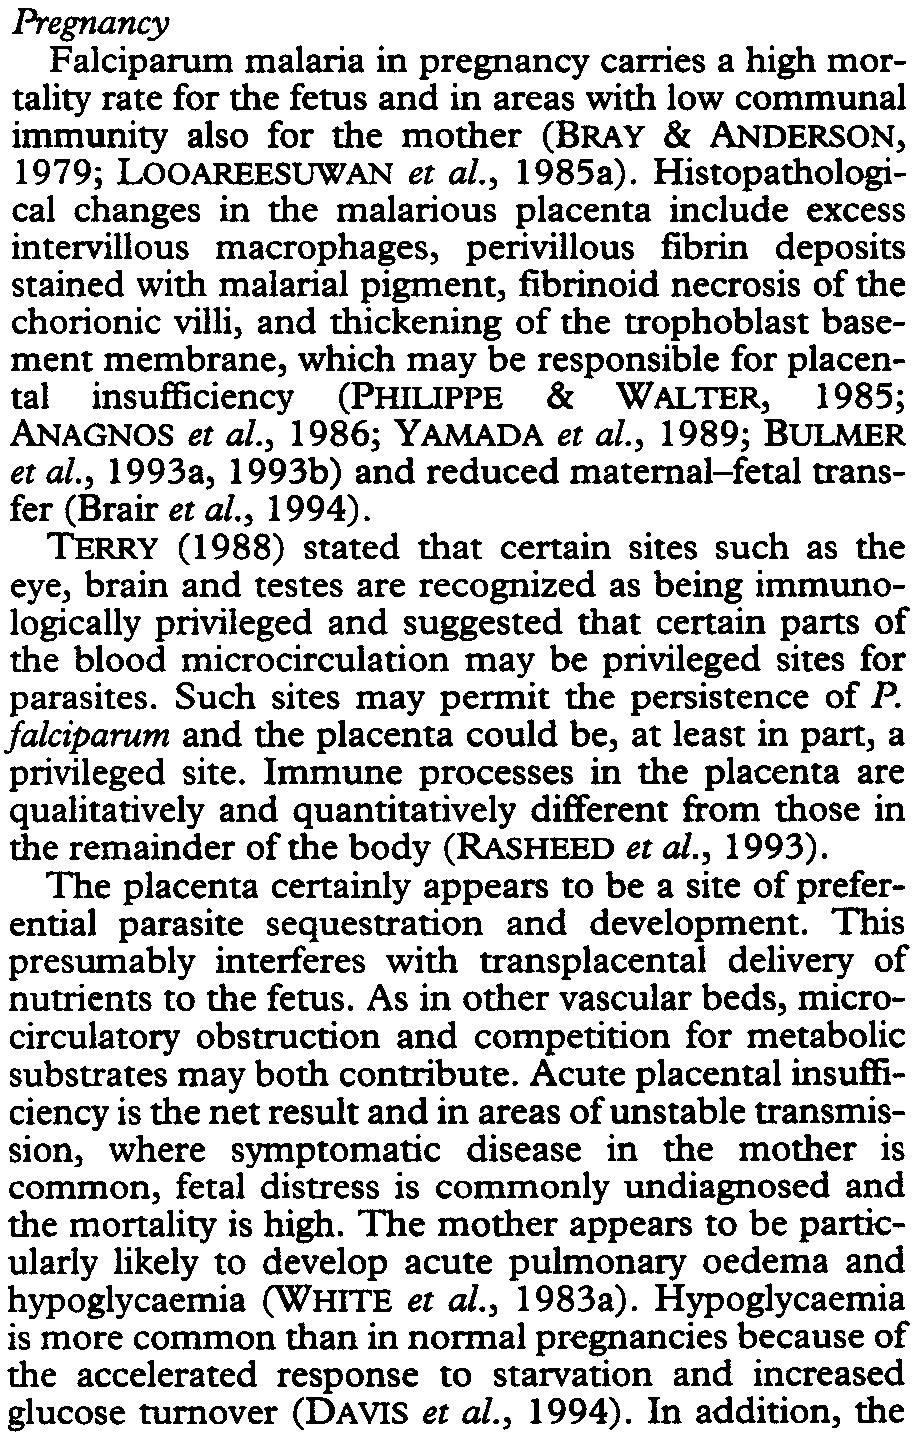 Hypoglycaemia (SADUN et at., 1965) and lactic acidosis are also common in the terminal phaes of the lethal animal malarias (KRISHNA et at., 198:&).